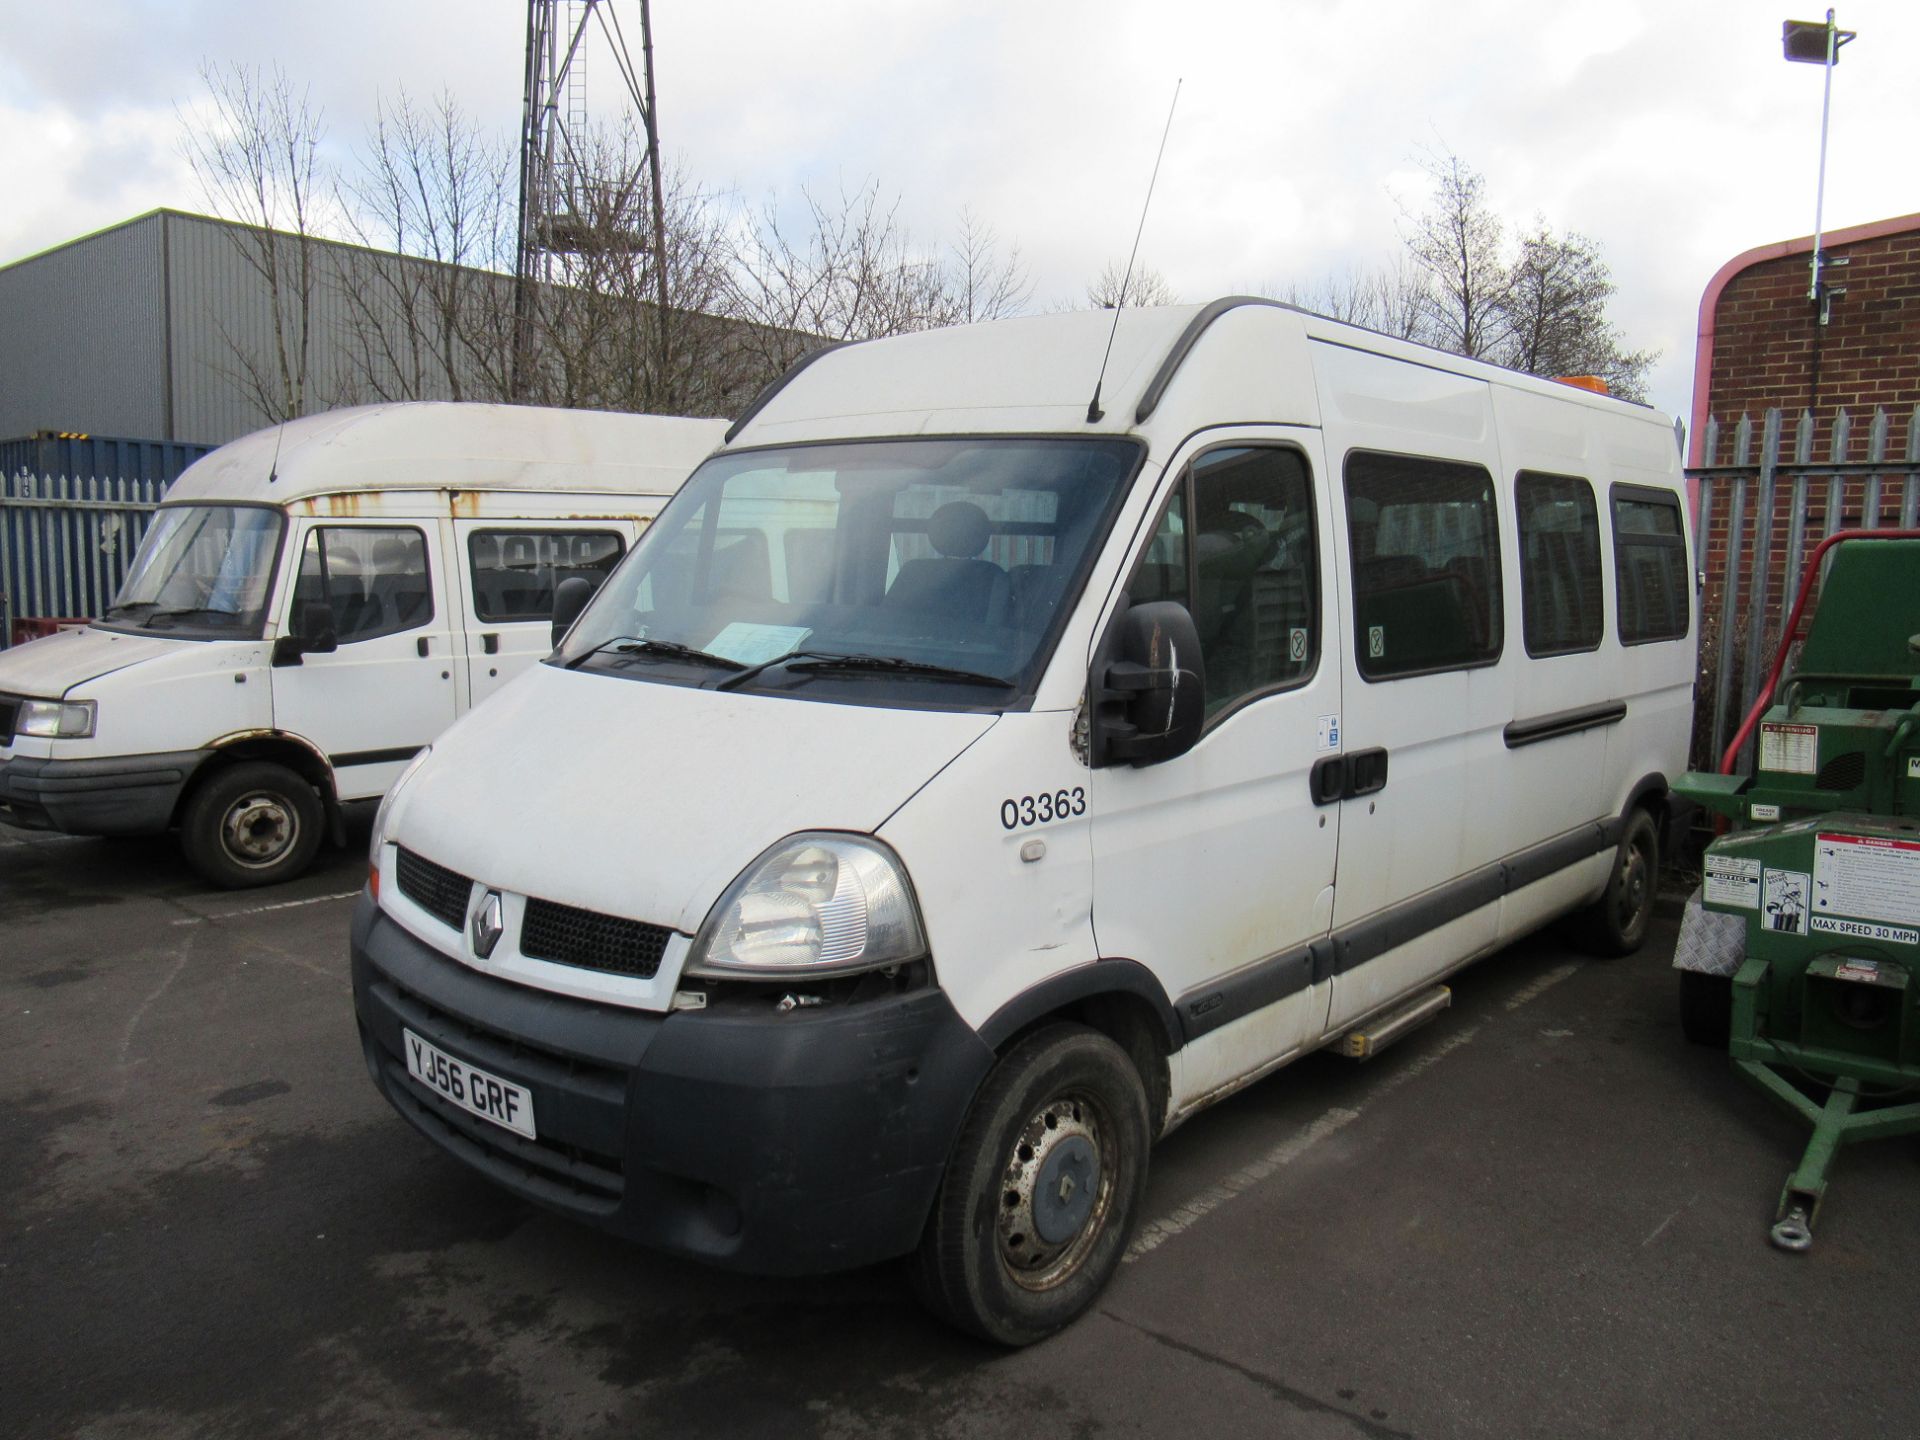 A Renault Dci 120 Mini Bus - Image 3 of 14